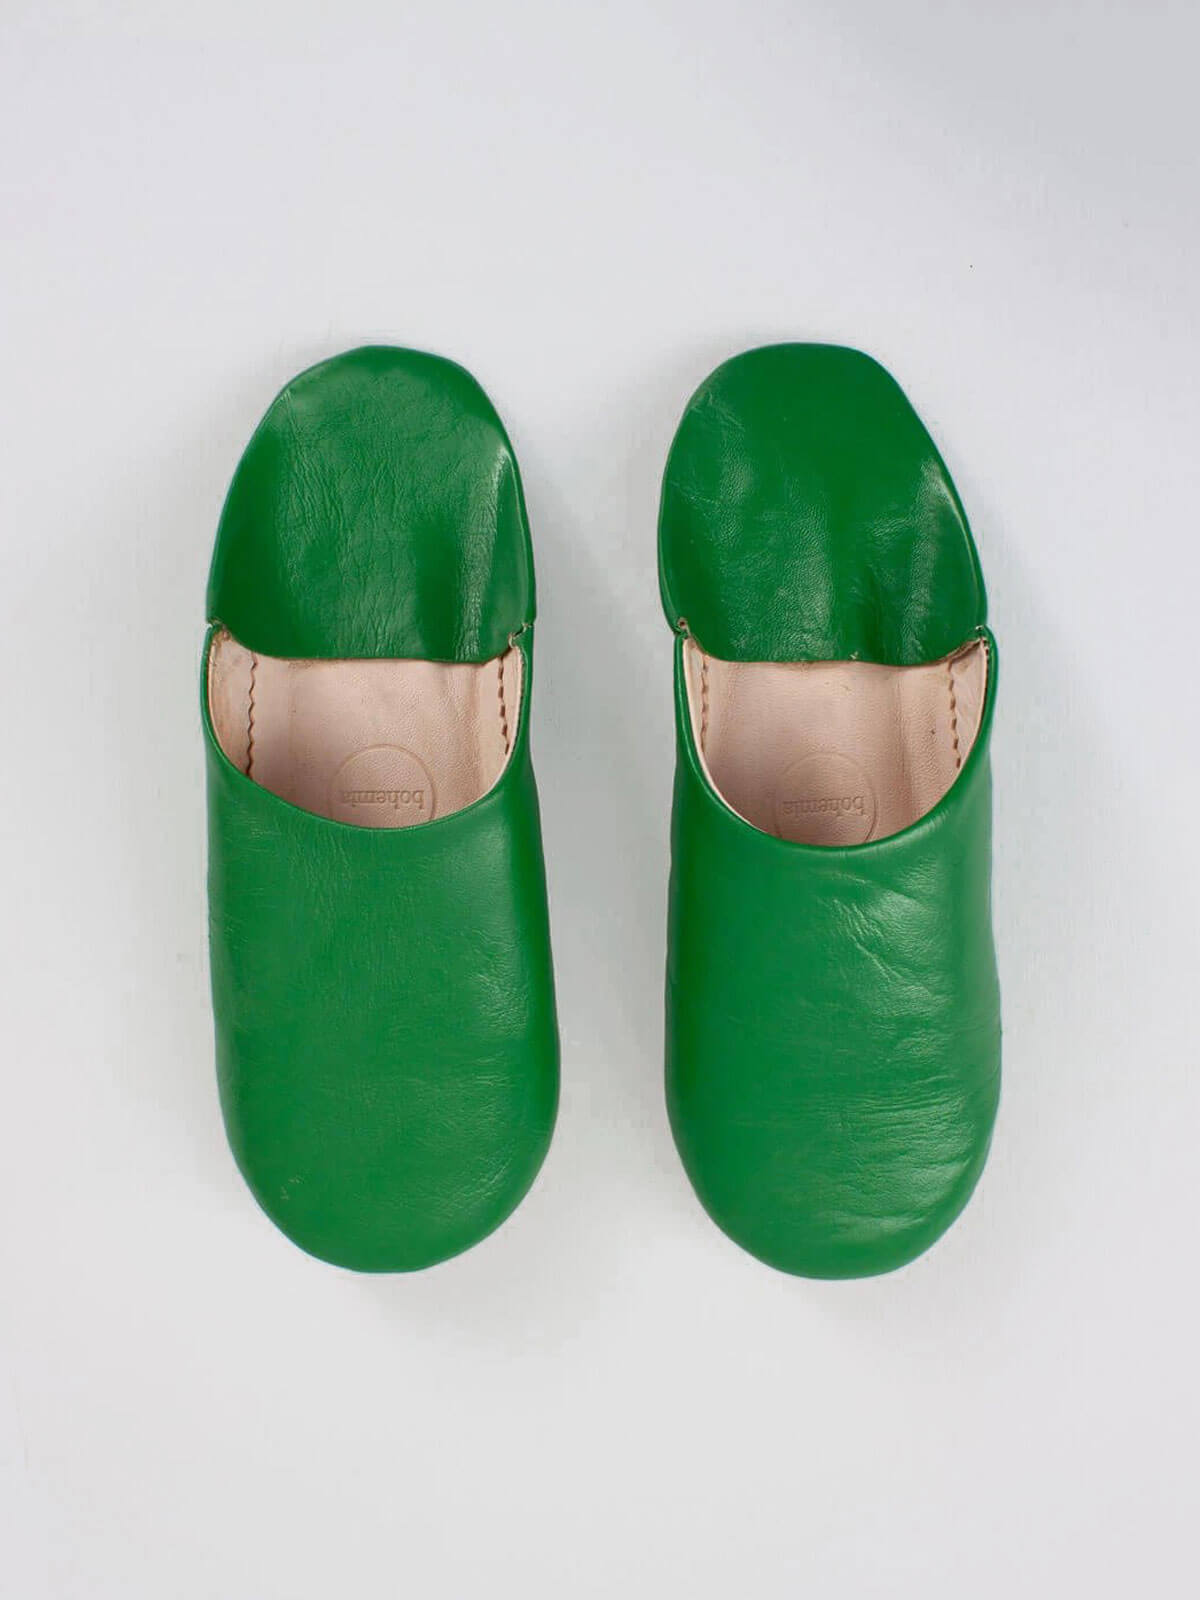 Moroccan Babouche Basic Slippers, Green